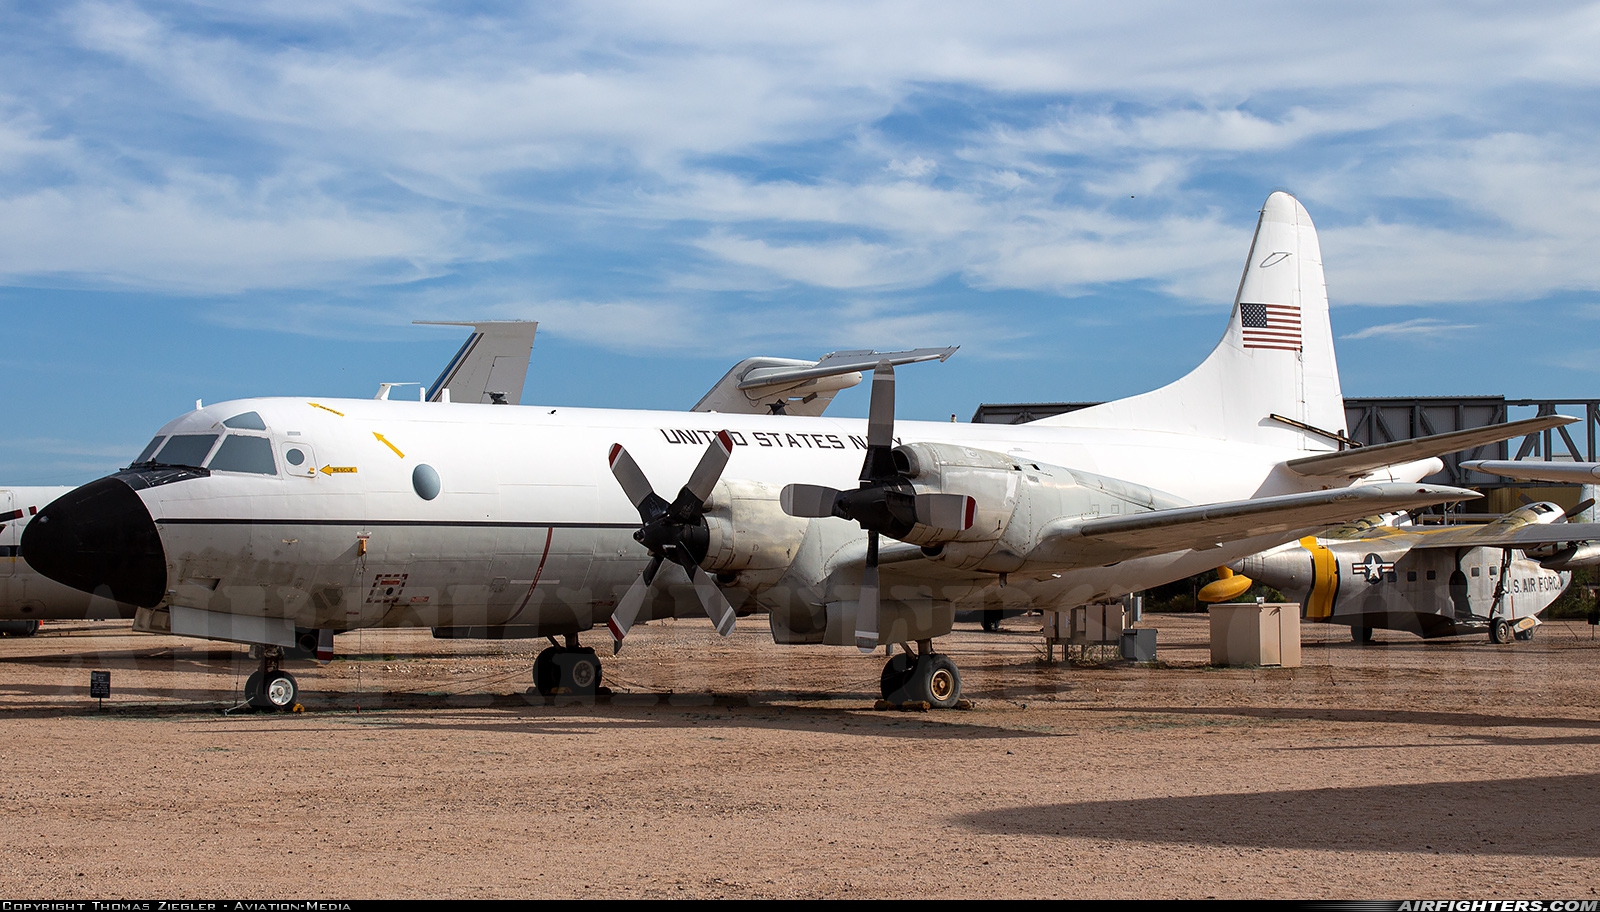 USA - Navy Lockheed VP-3A Orion 150511 at Tucson - Pima Air and Space Museum, USA